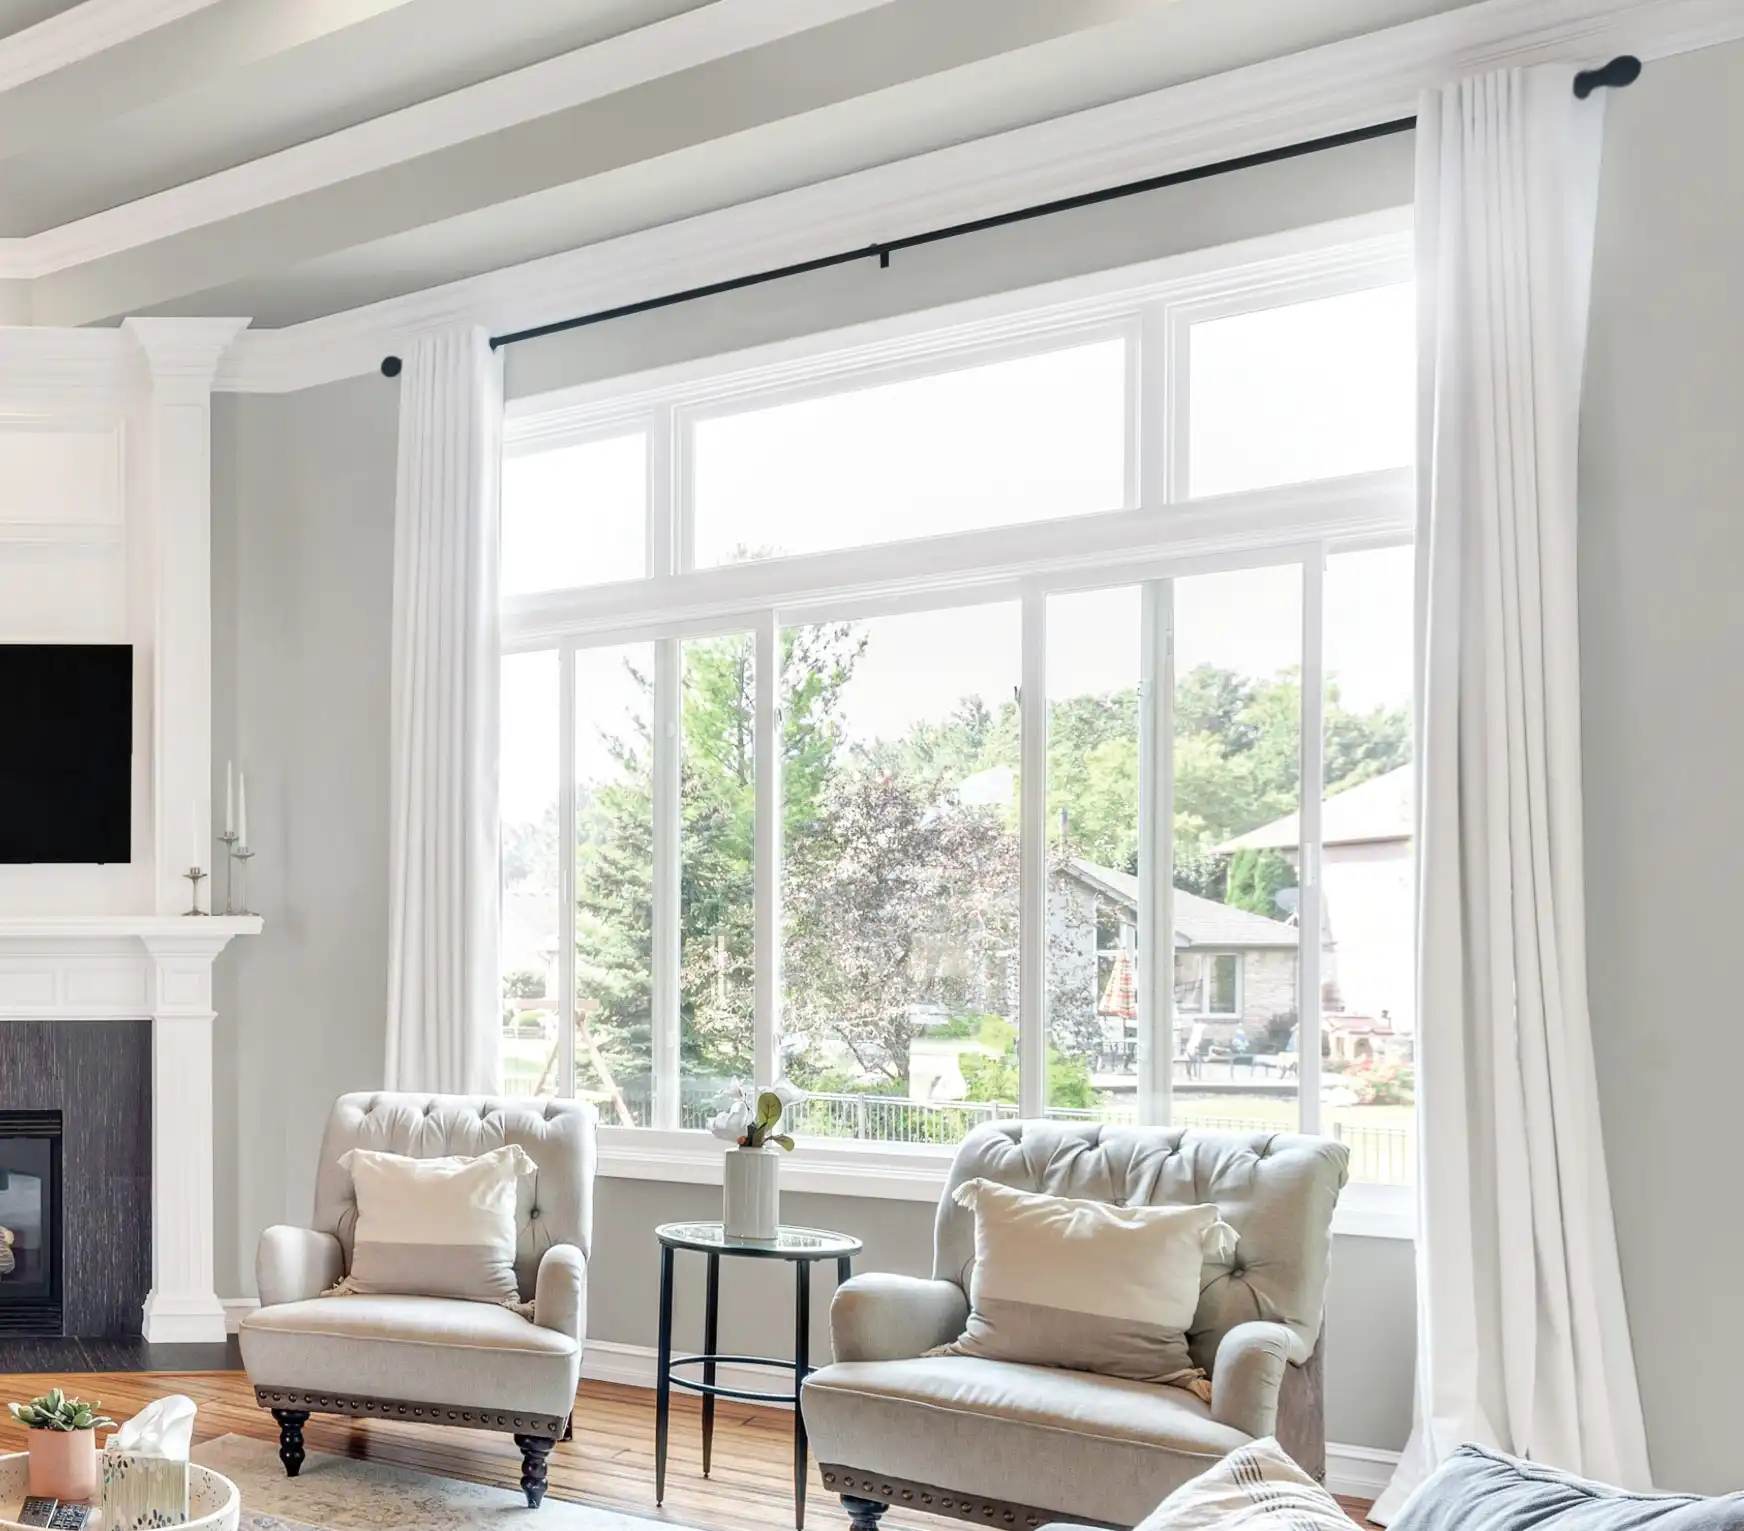 View of a living room with white Marvin Replacement Slider windows.